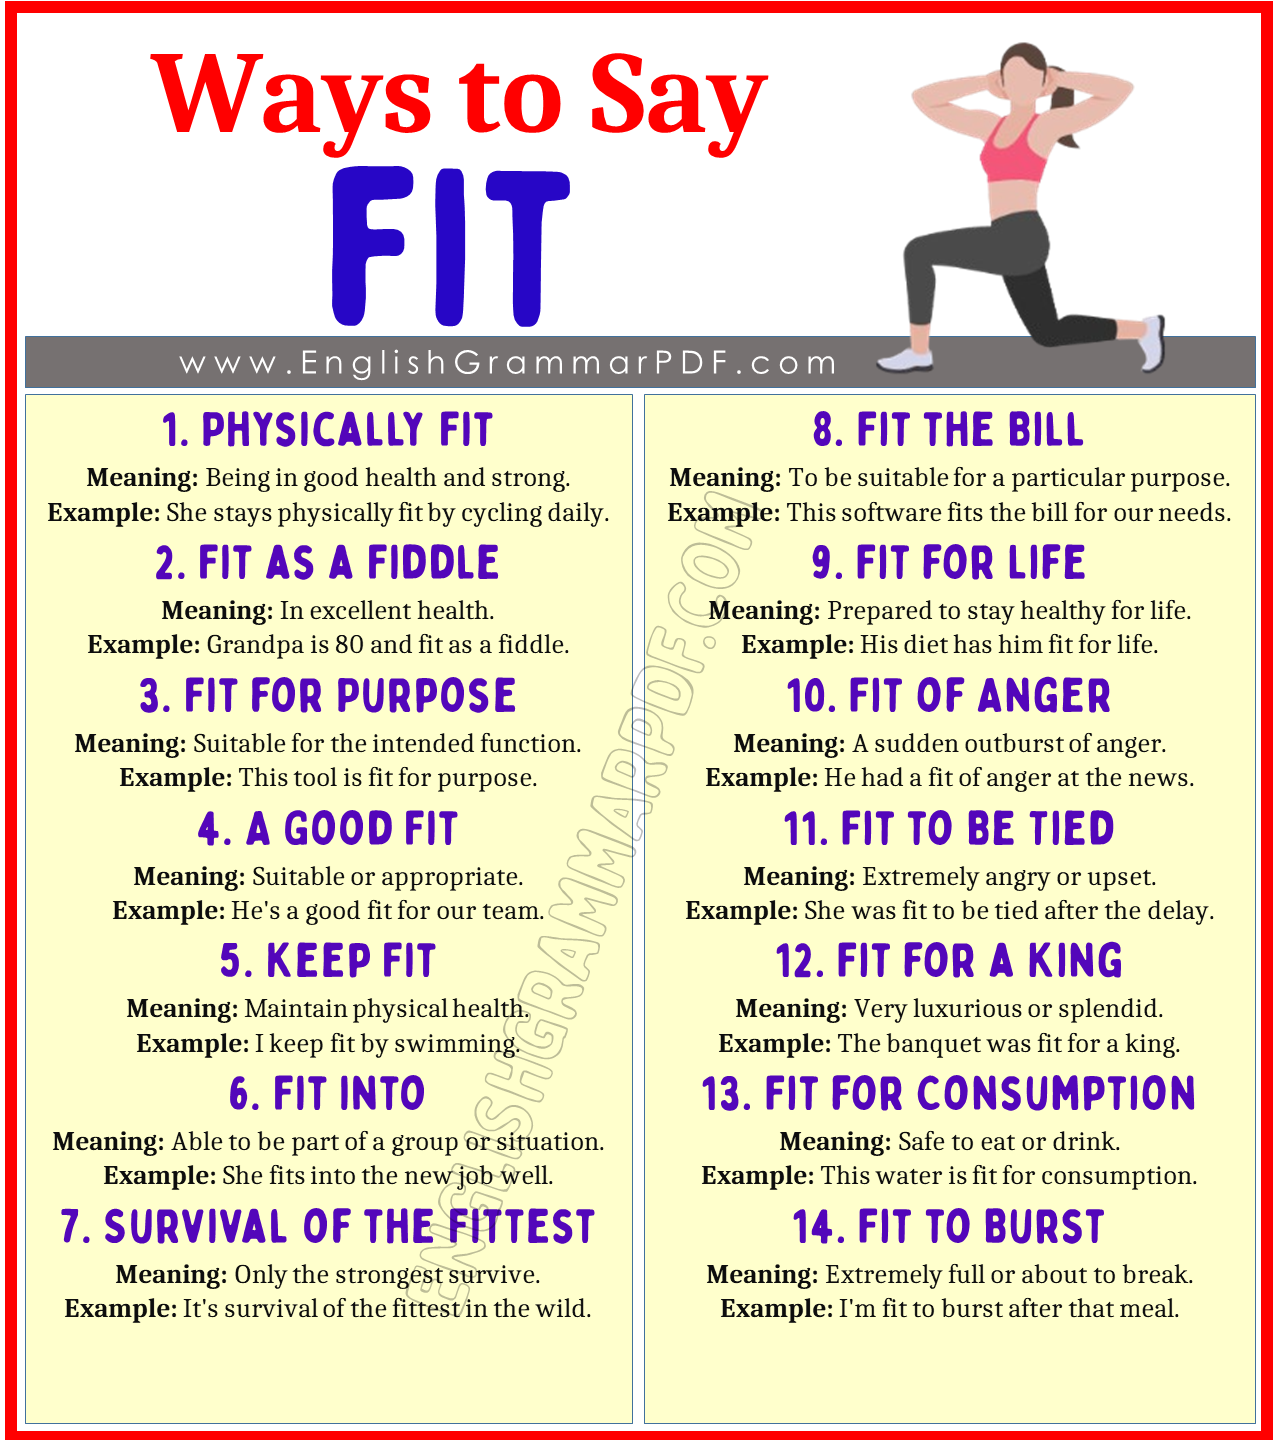 Ways to Say Fit 1